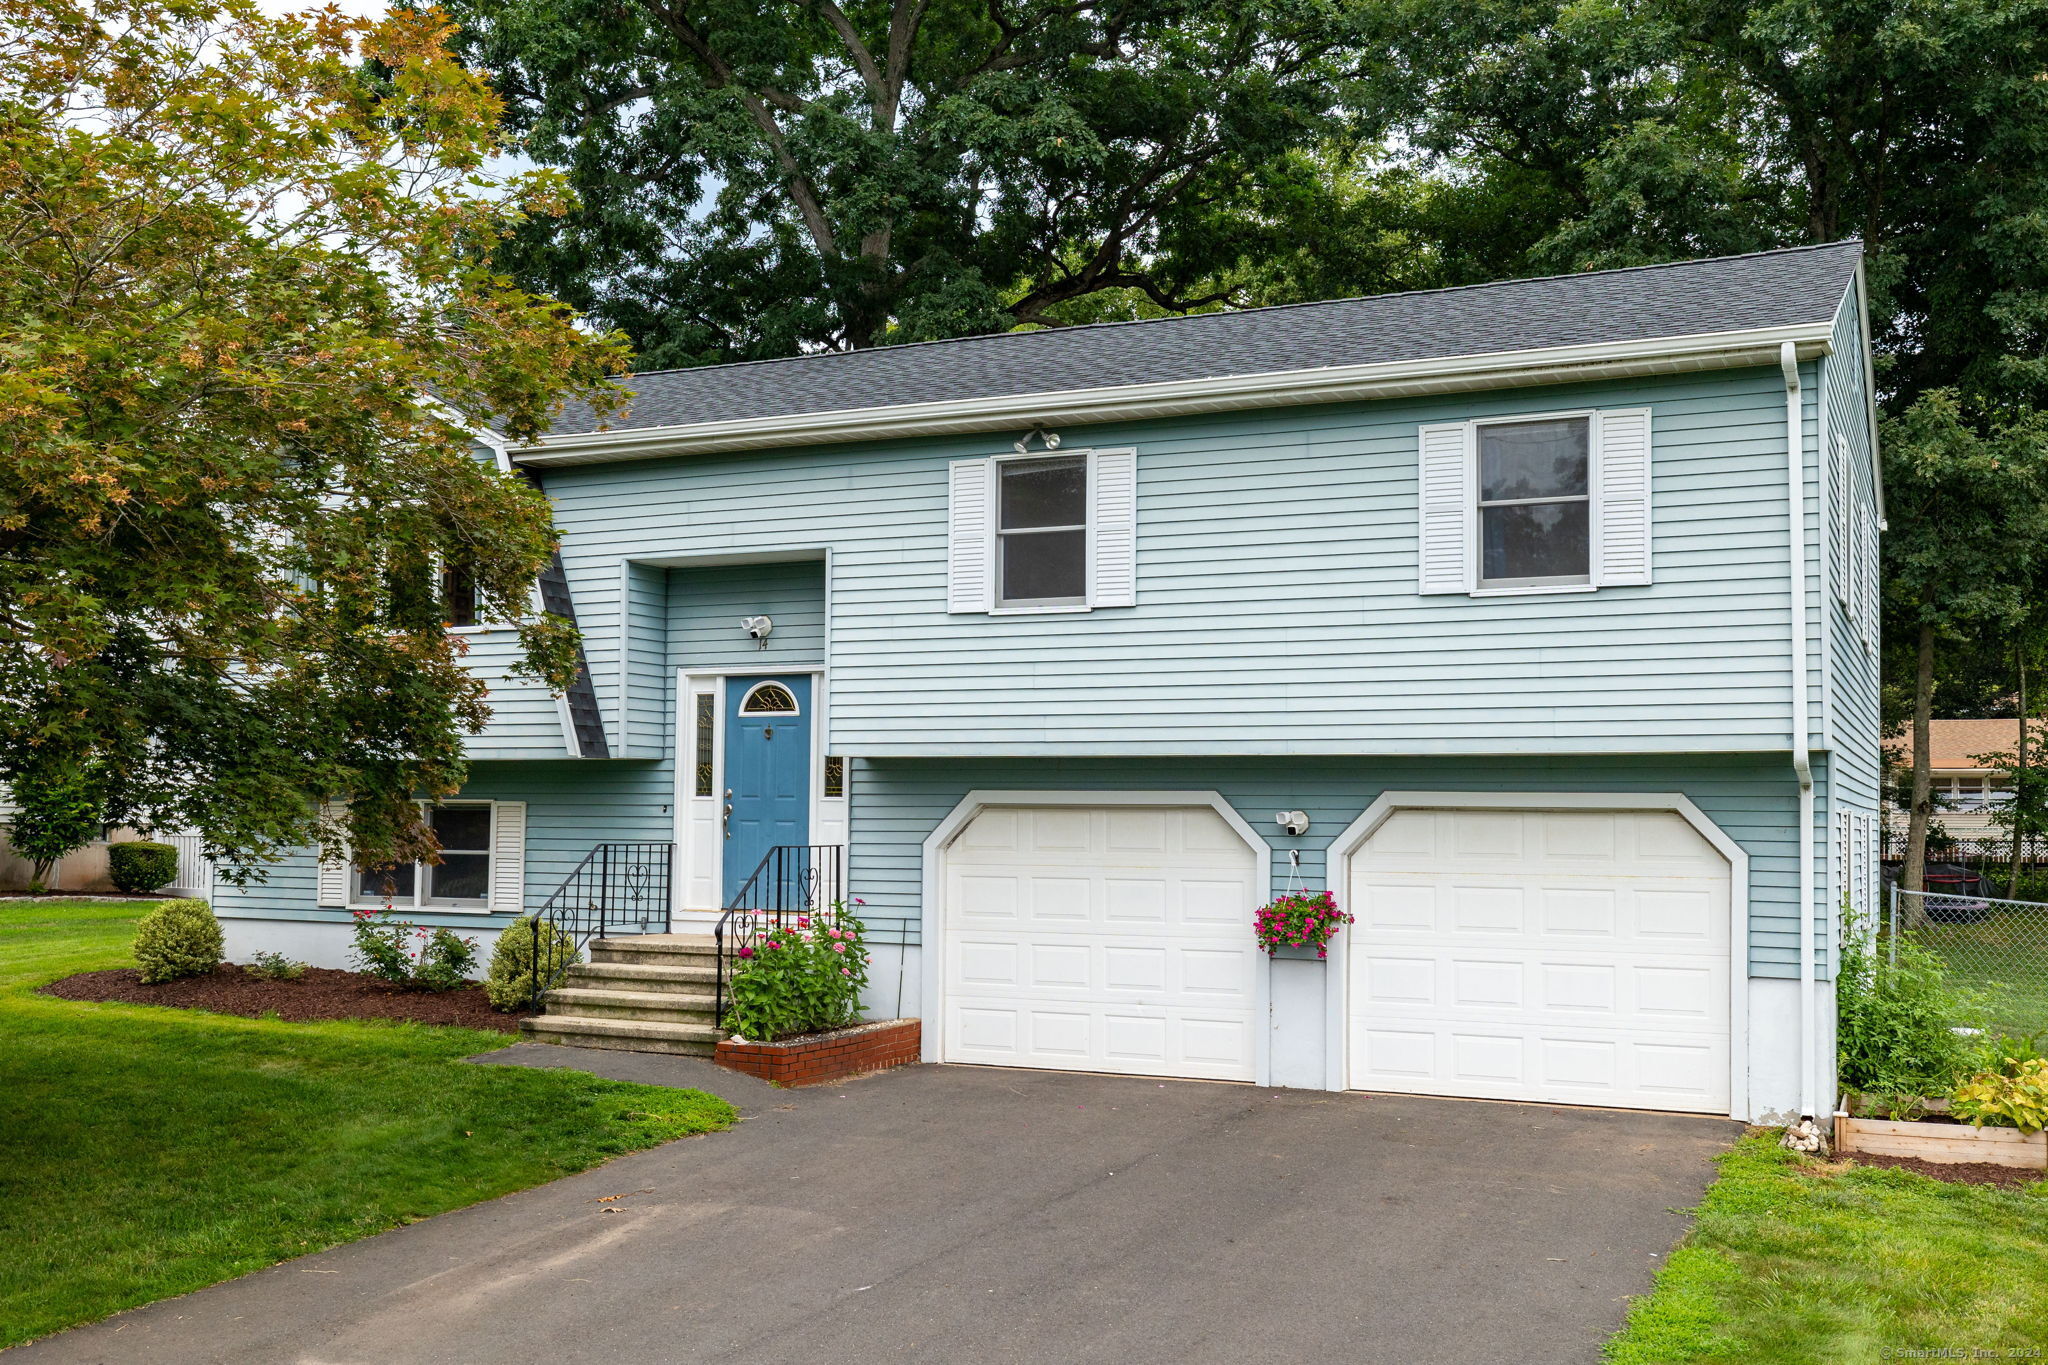 Property for Sale at 14 Wellwyn Drive, Portland, Connecticut - Bedrooms: 3 
Bathrooms: 3 
Rooms: 7  - $374,900